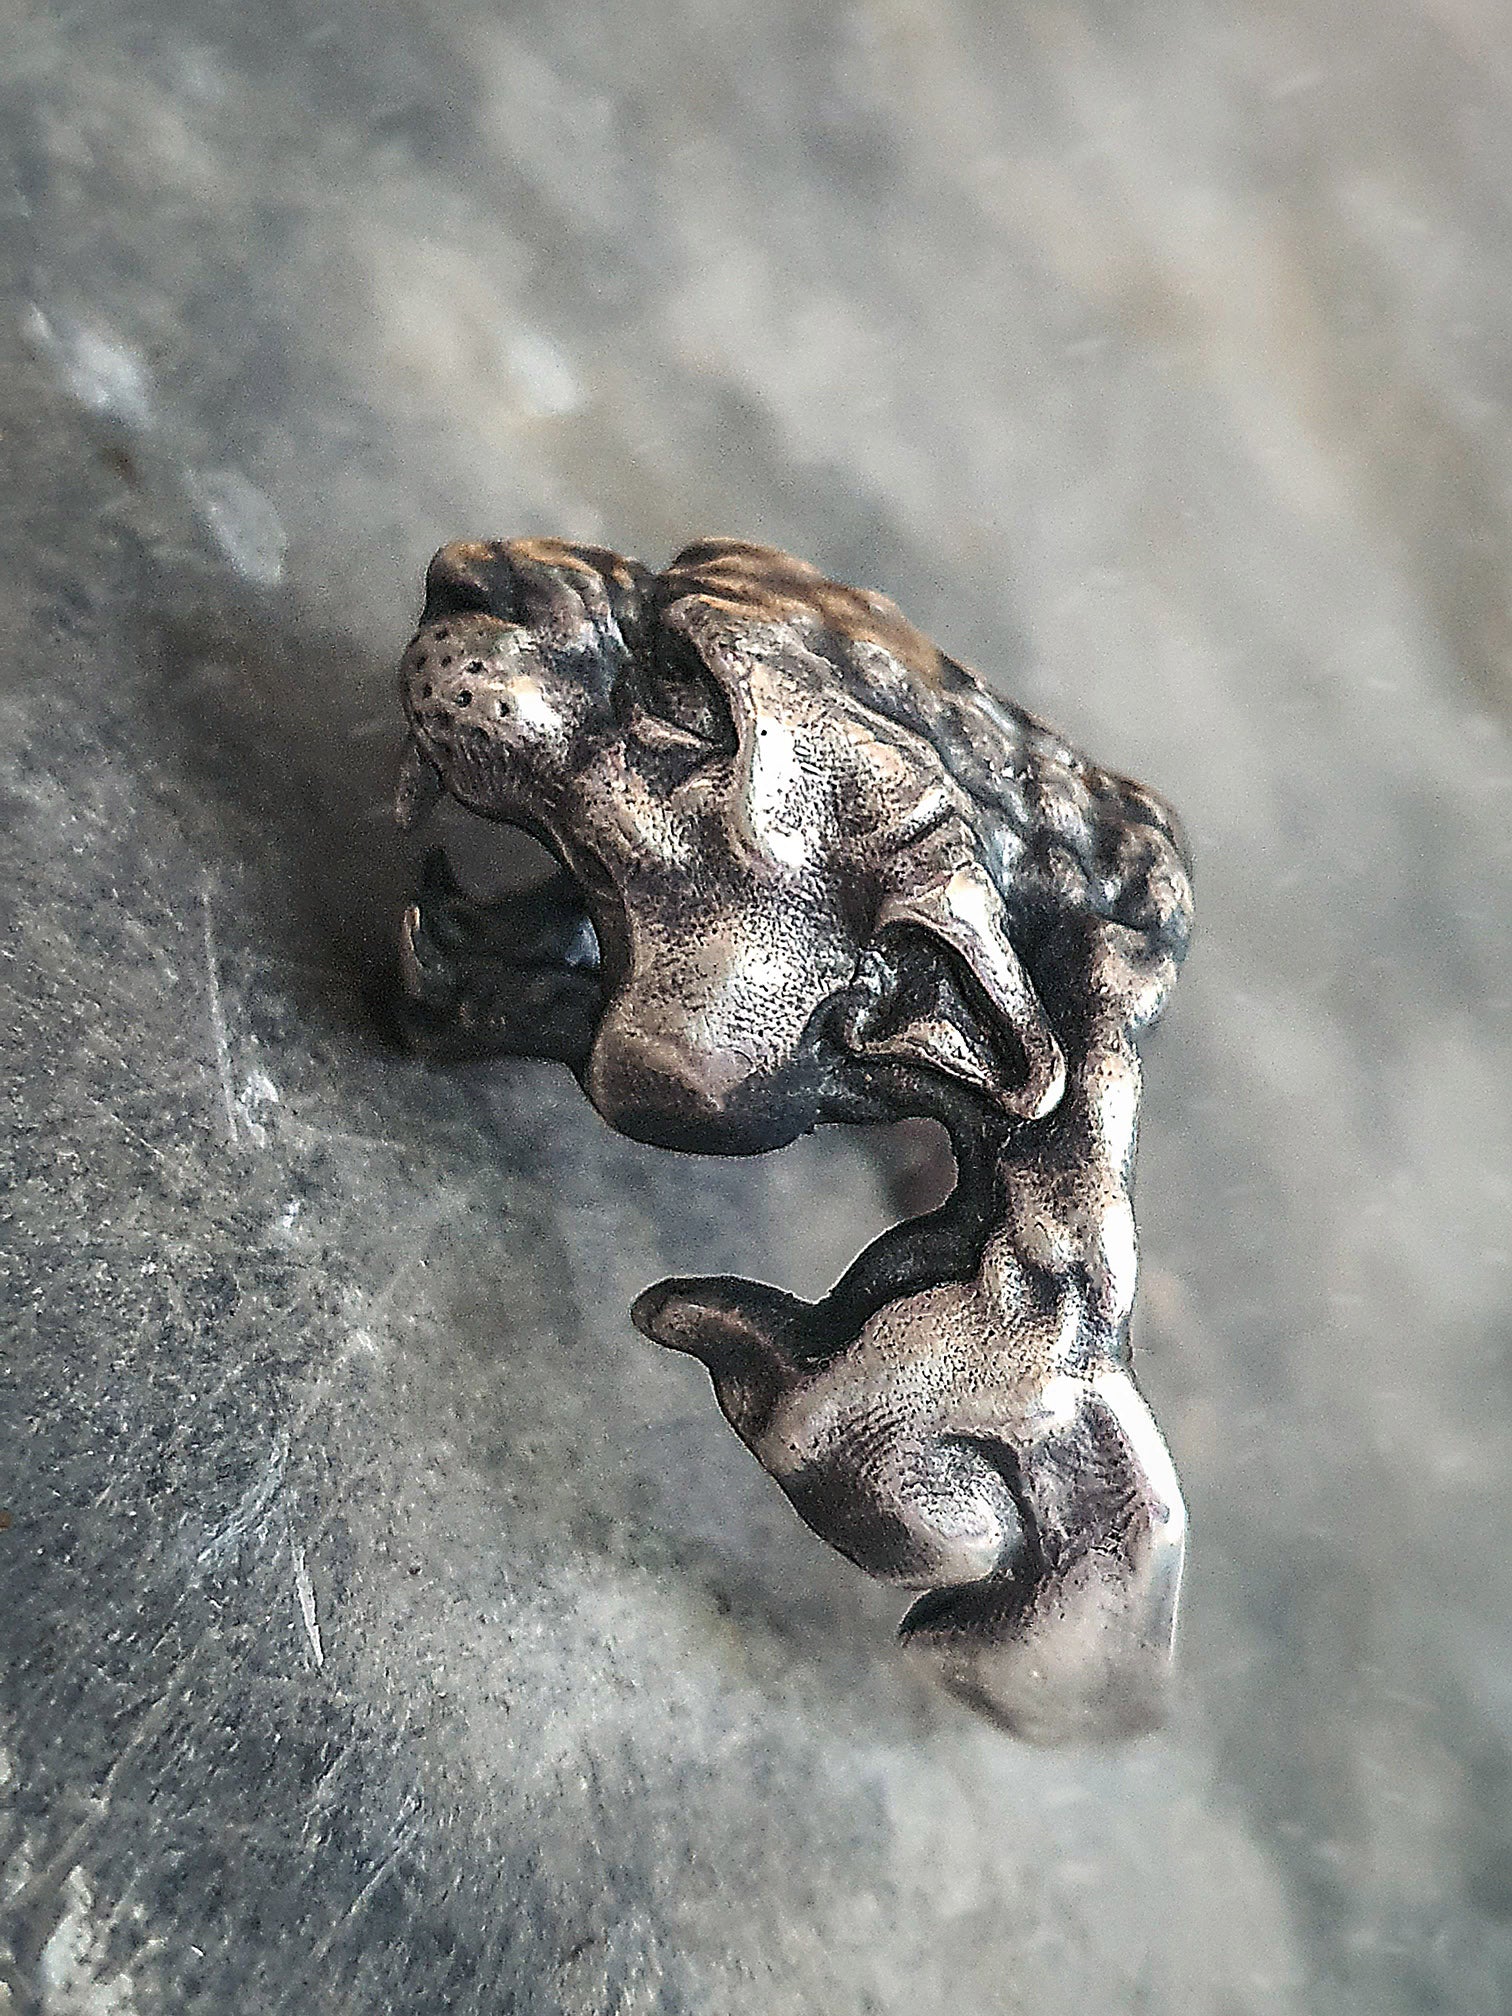 Leopard Ring | 925 Silver